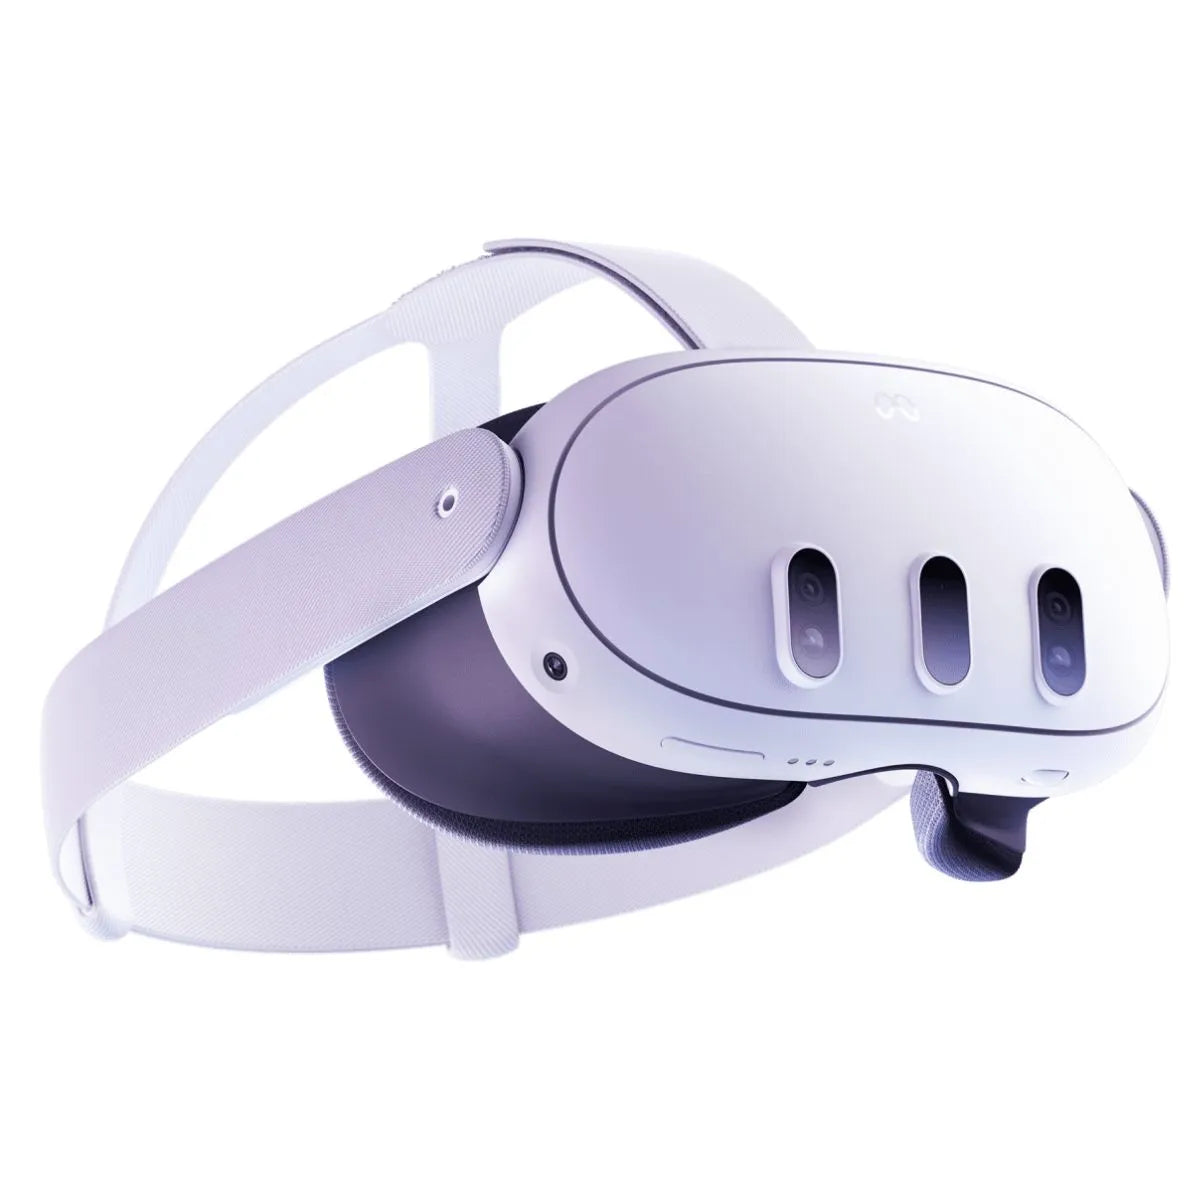 Meta Quest 3 (128 or 512 GB) - Buy Mixed Reality Headset